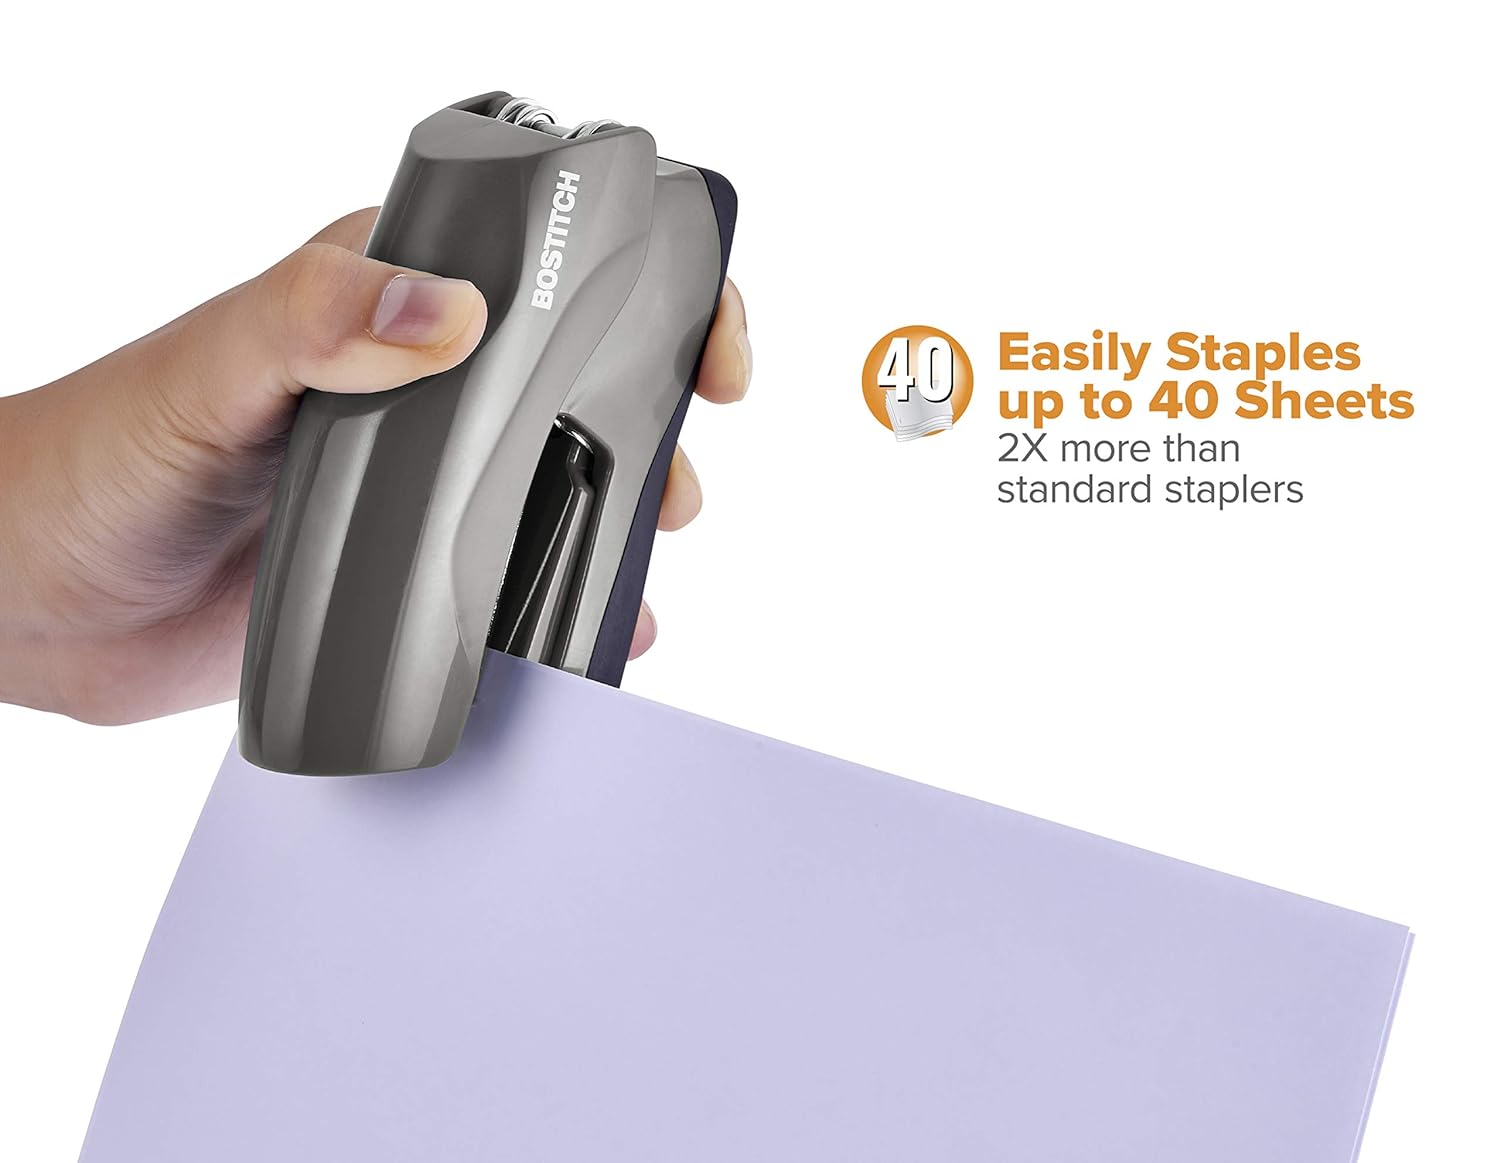 Bostitch Office Heavy Duty 40 Sheet Stapler, Small Stapler Size, Fits into The Palm of Your Hand; Gray